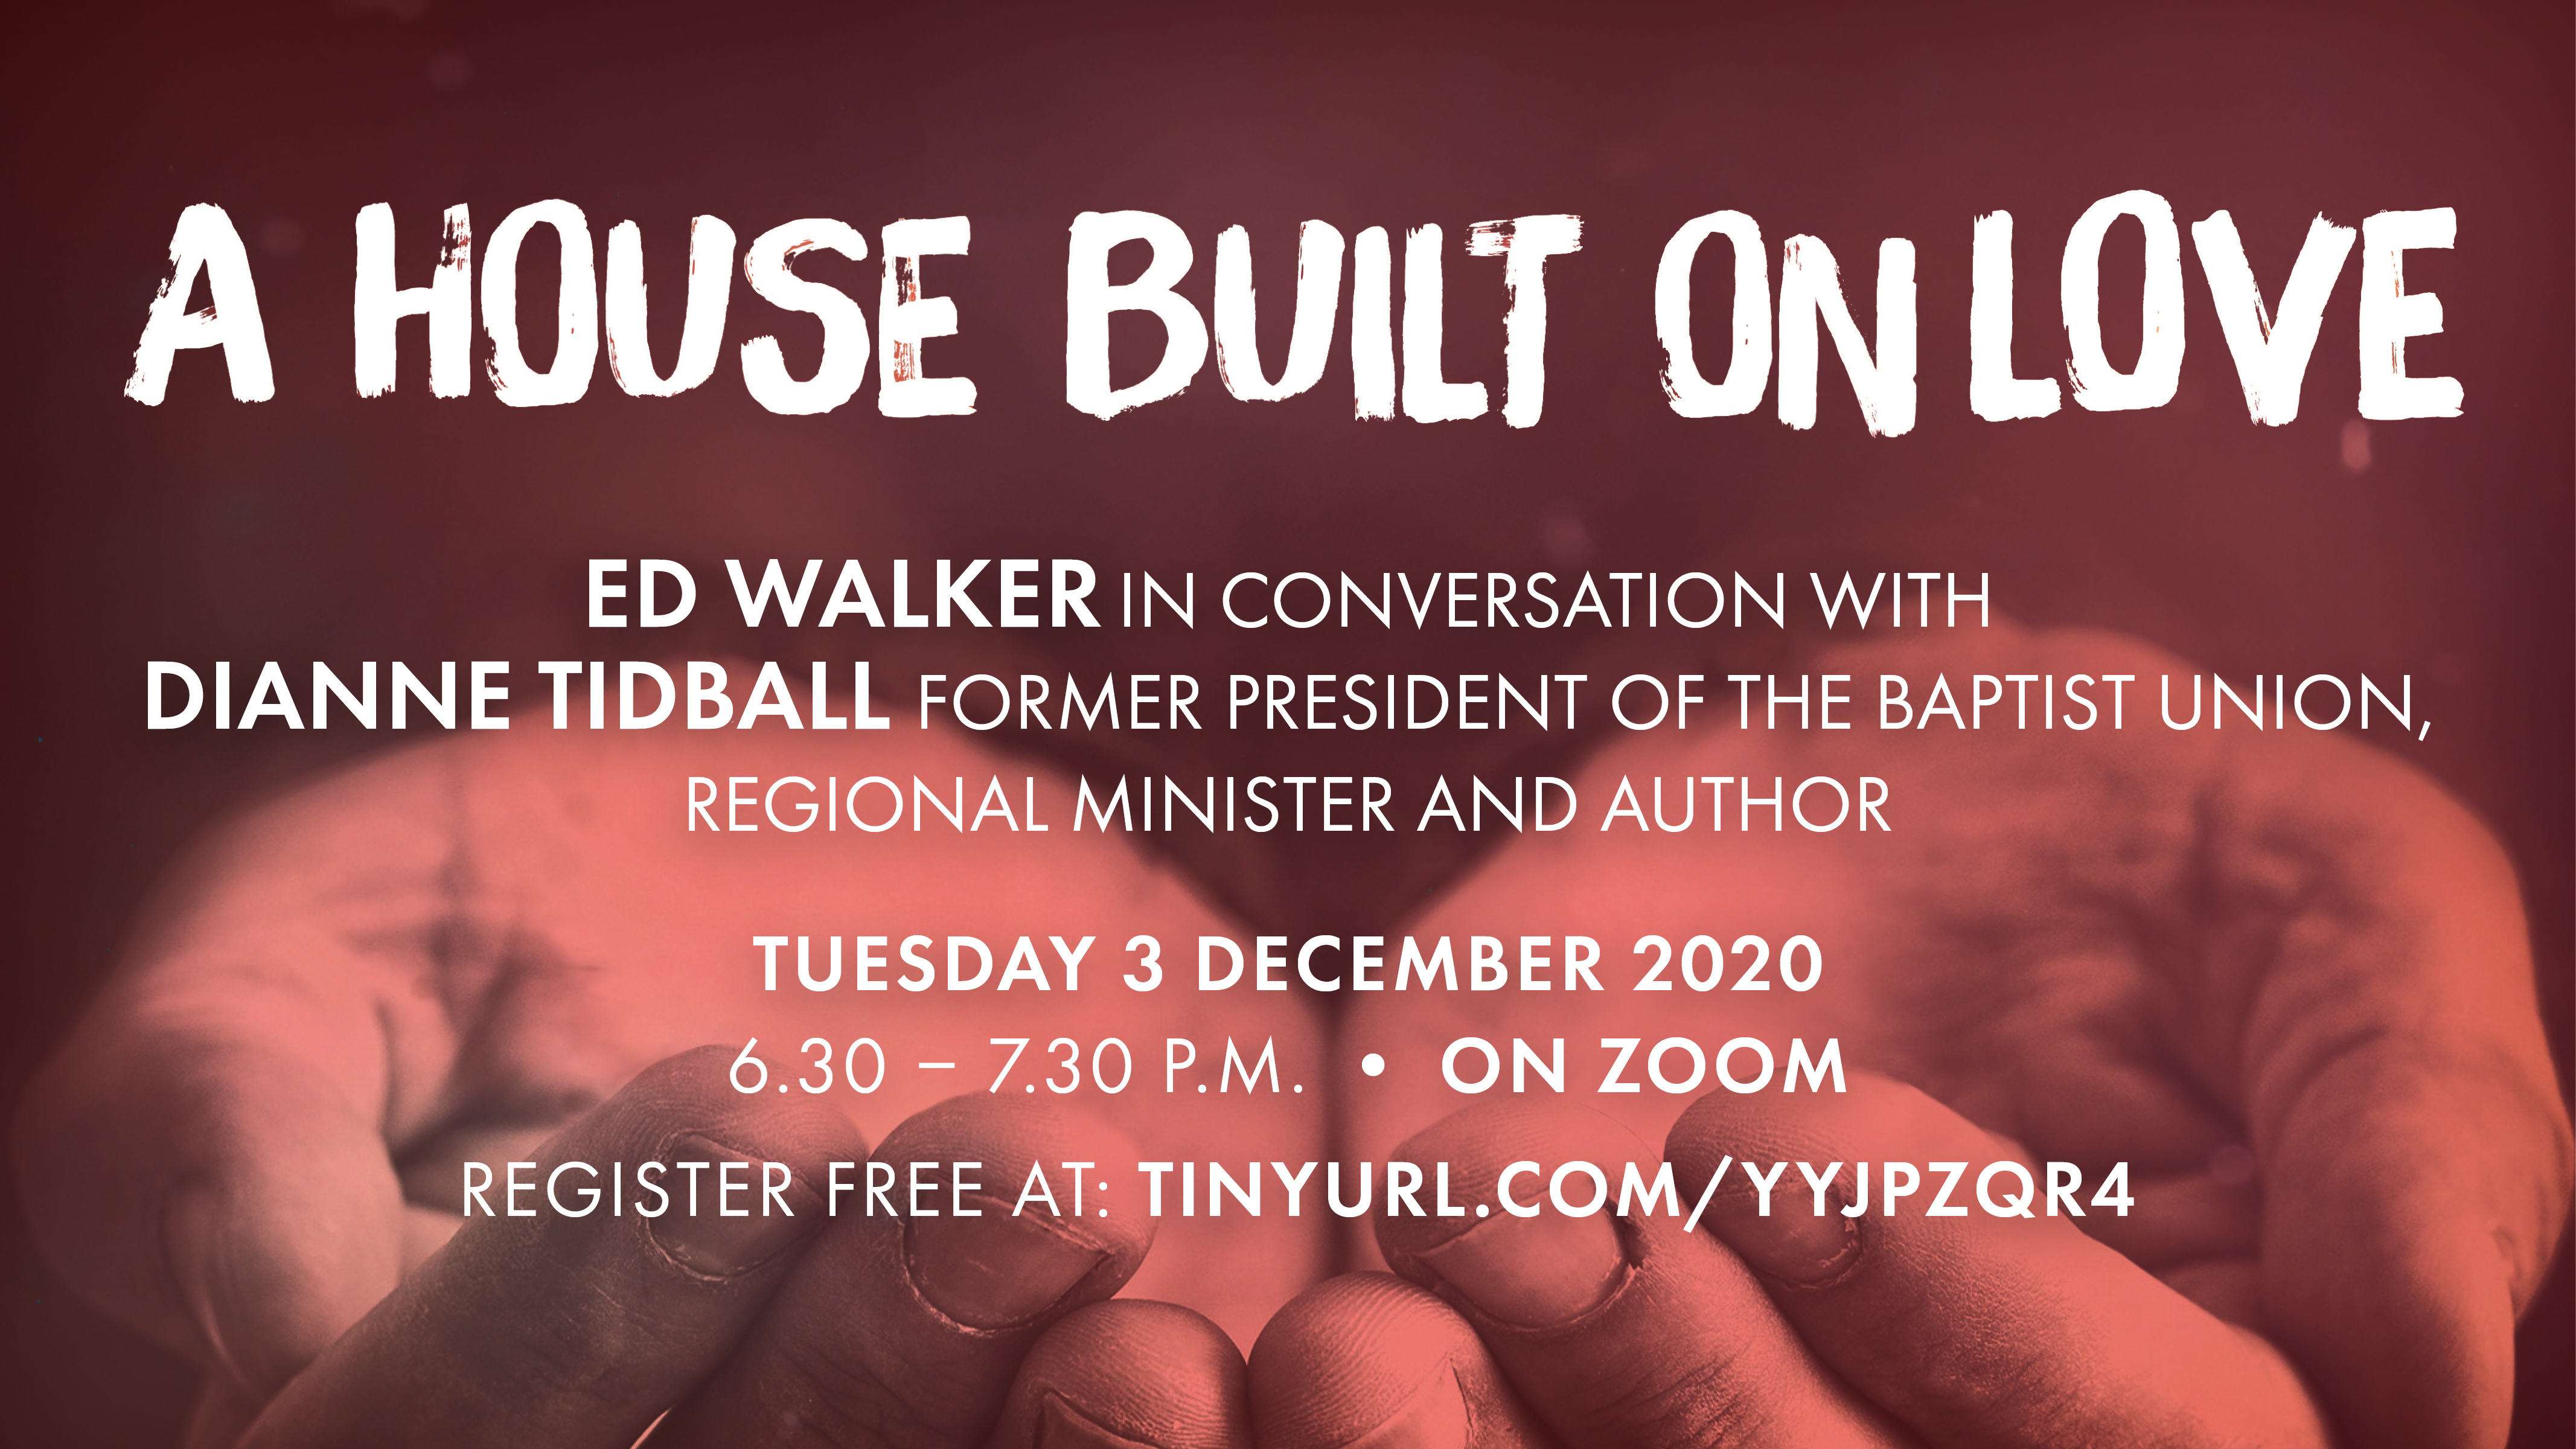 Ed Walker in Conversation with Dianne Tidball